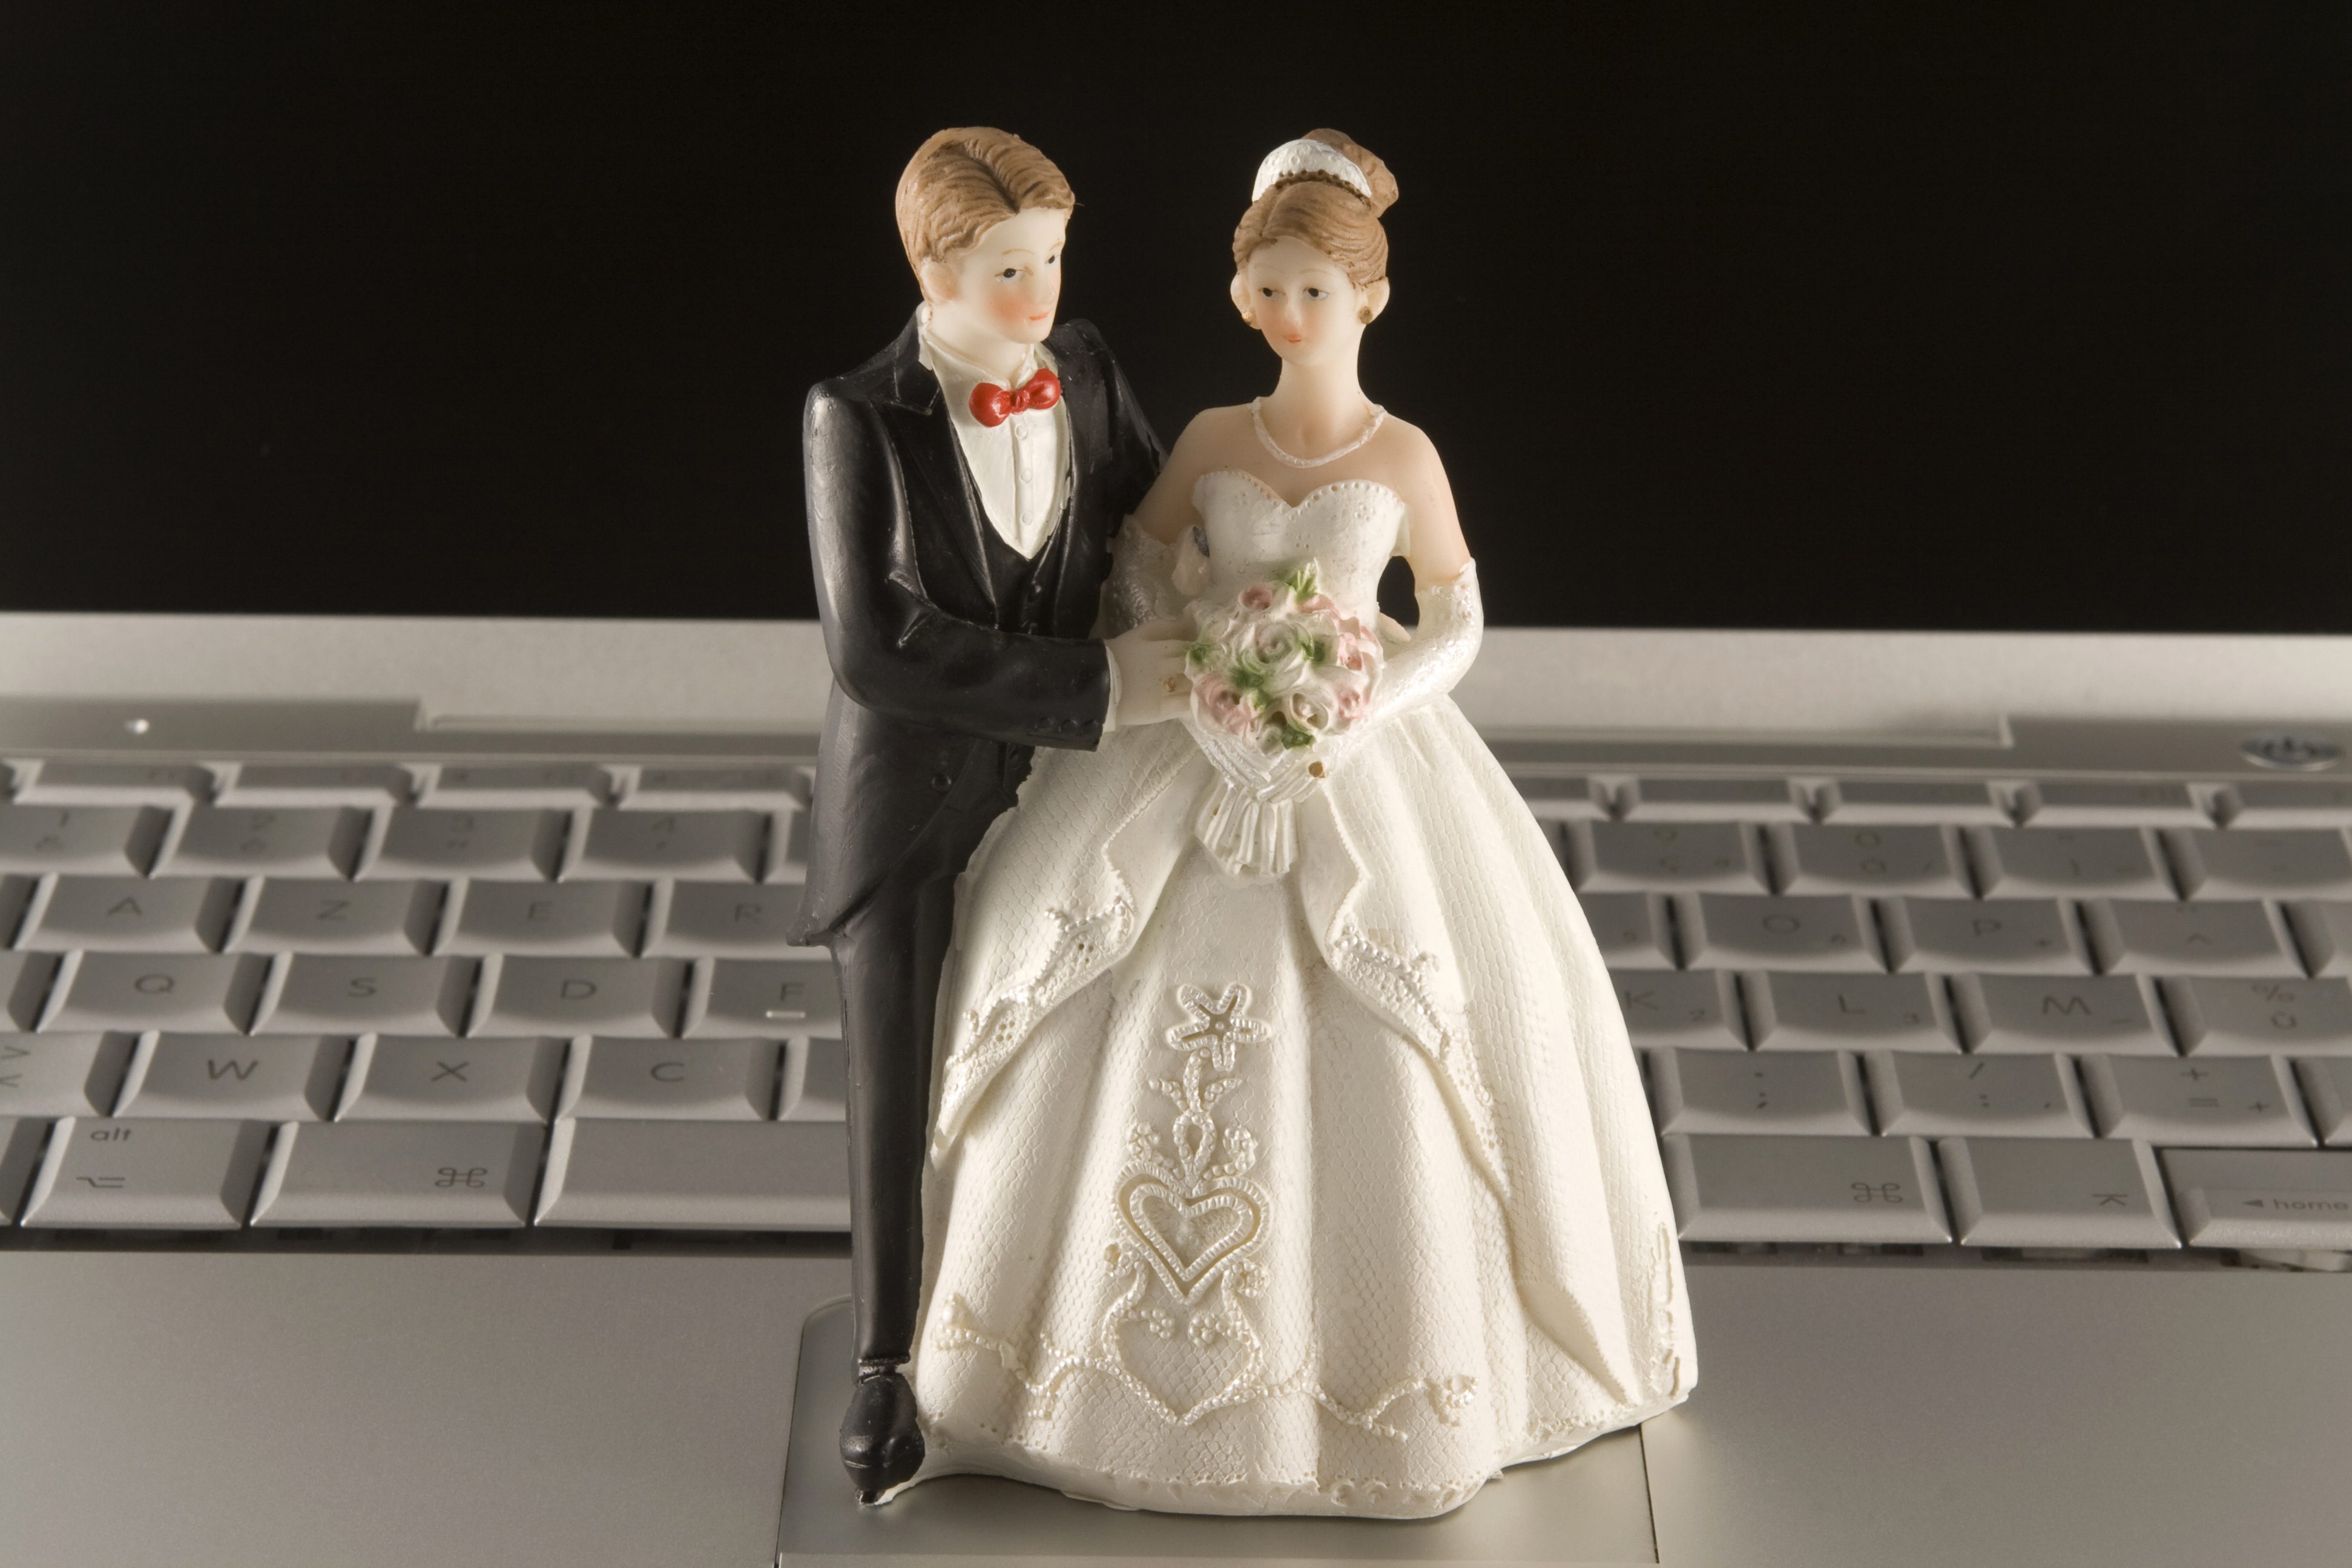 Rules To Dating Online: For Women Looking For A Husband?